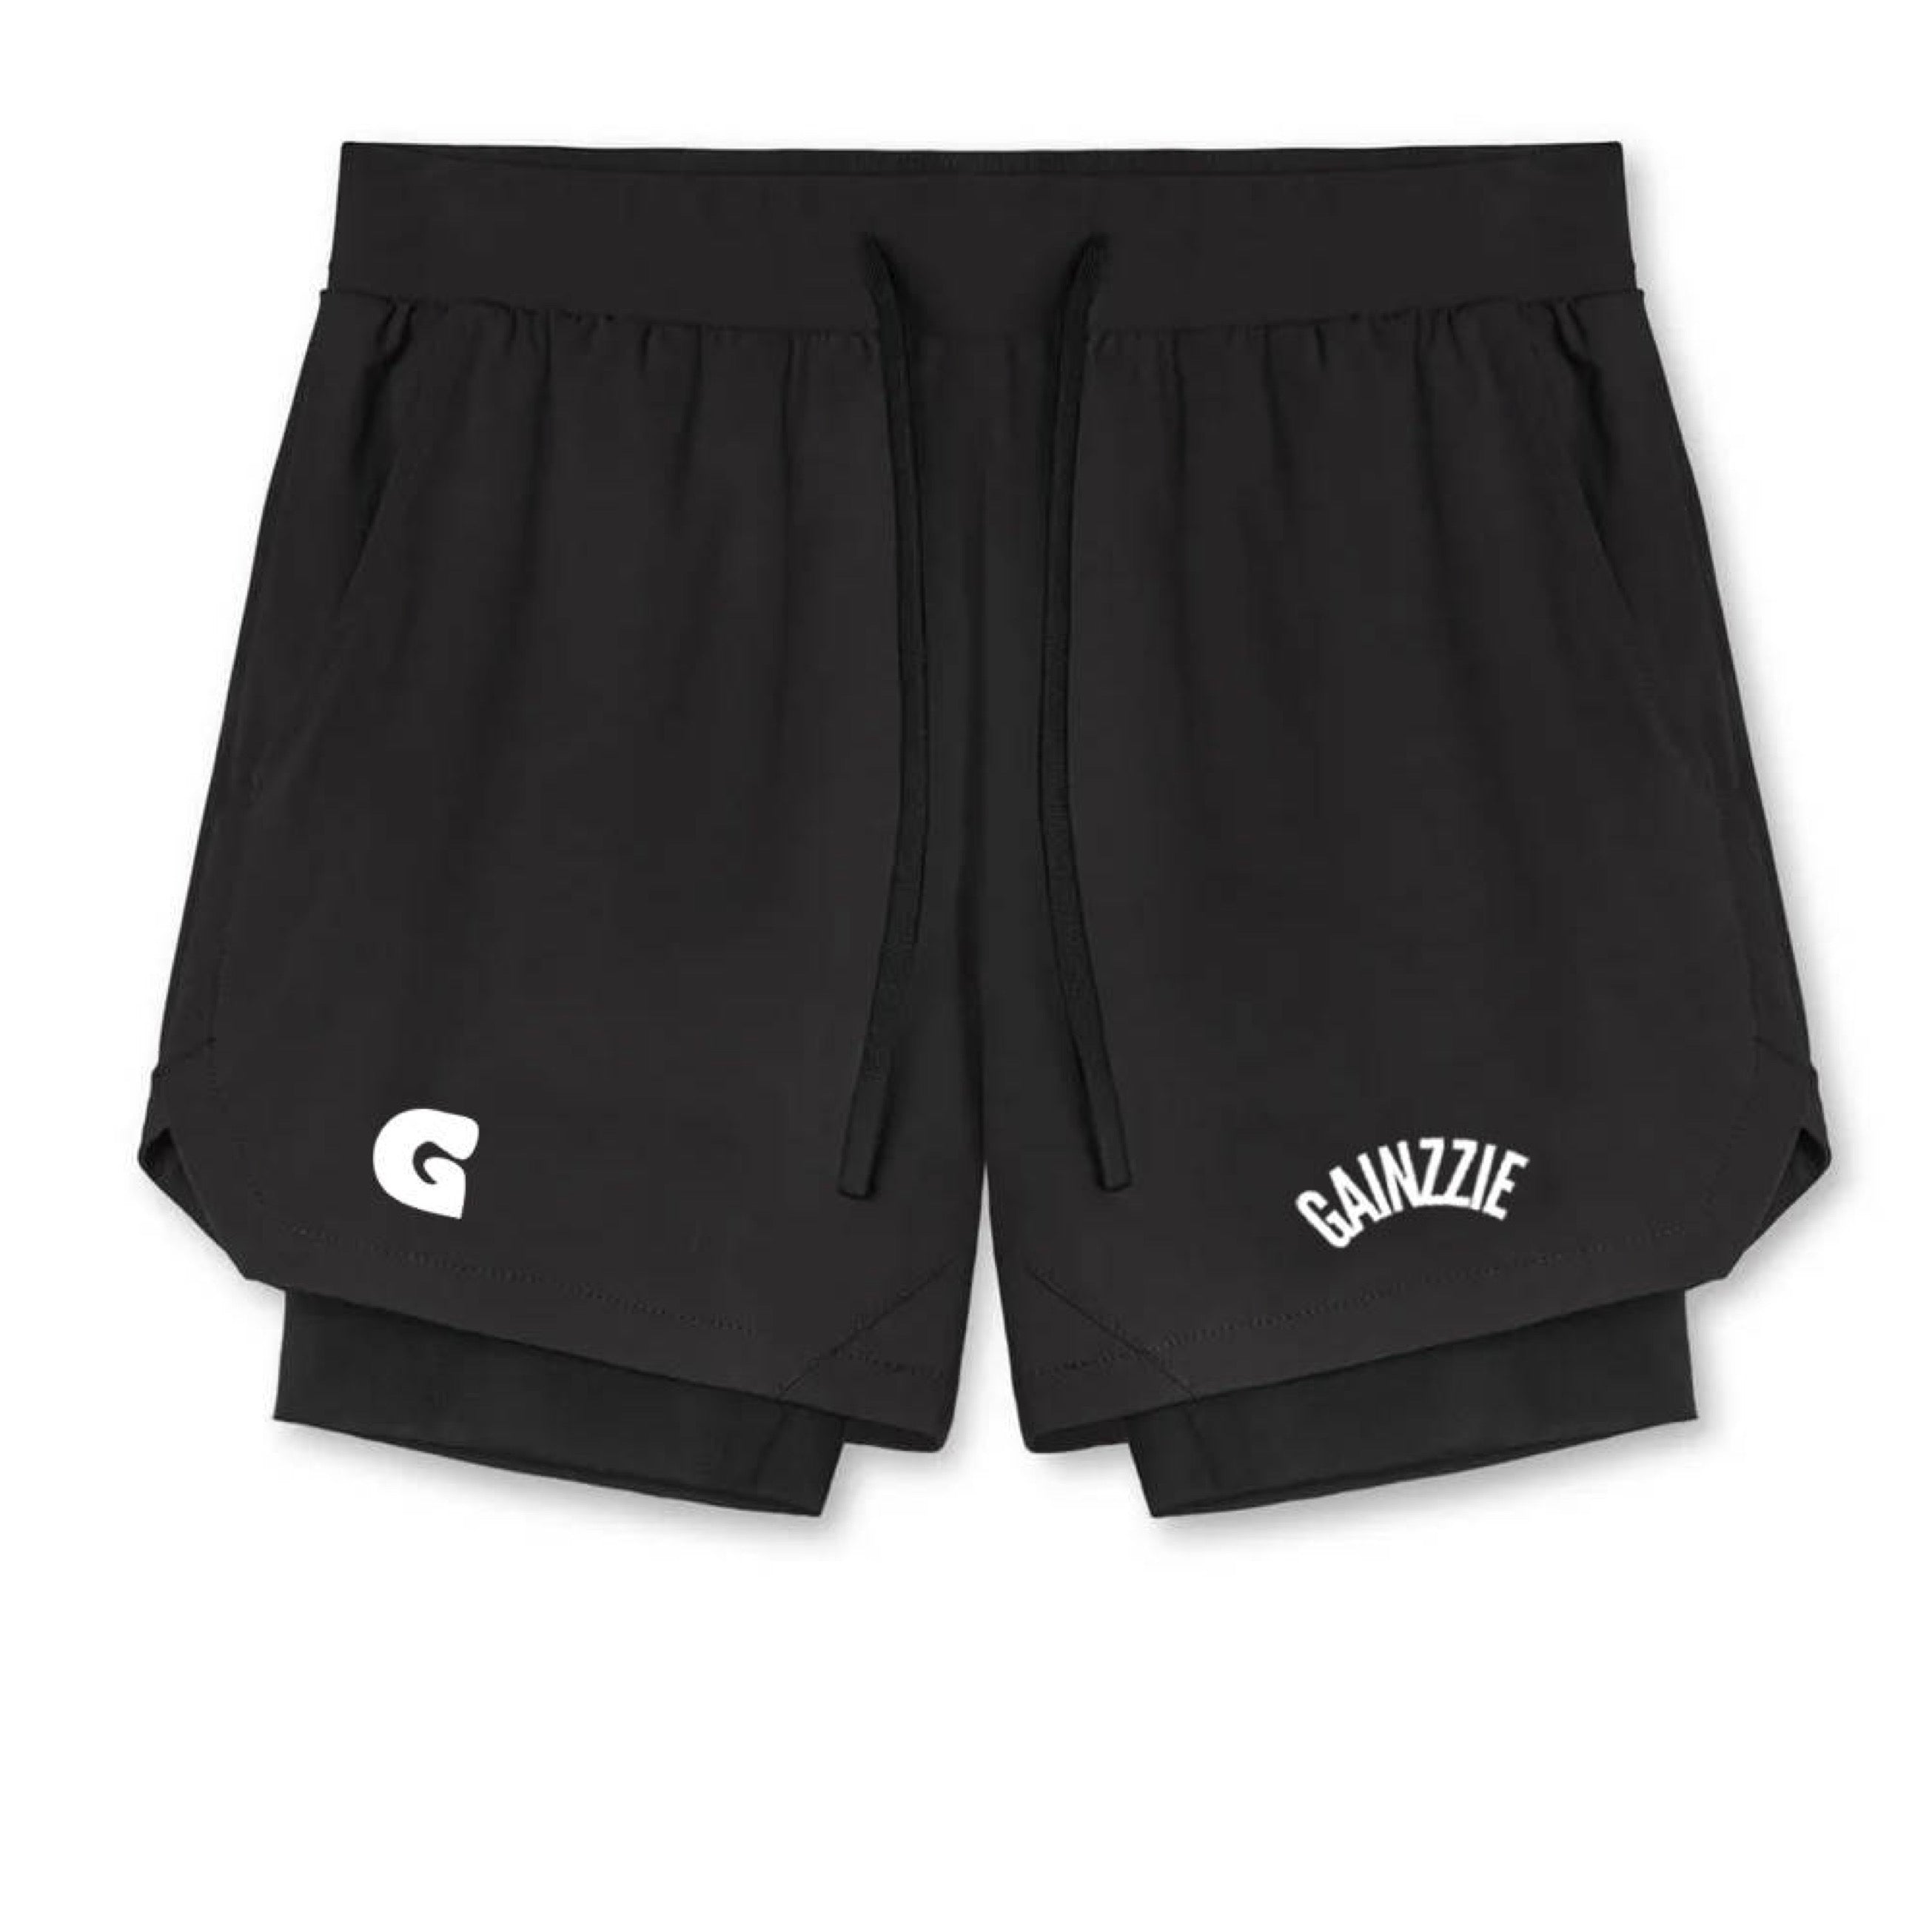 Secure 2.0 - Men's black shorts with breathable tights - Gainzzie